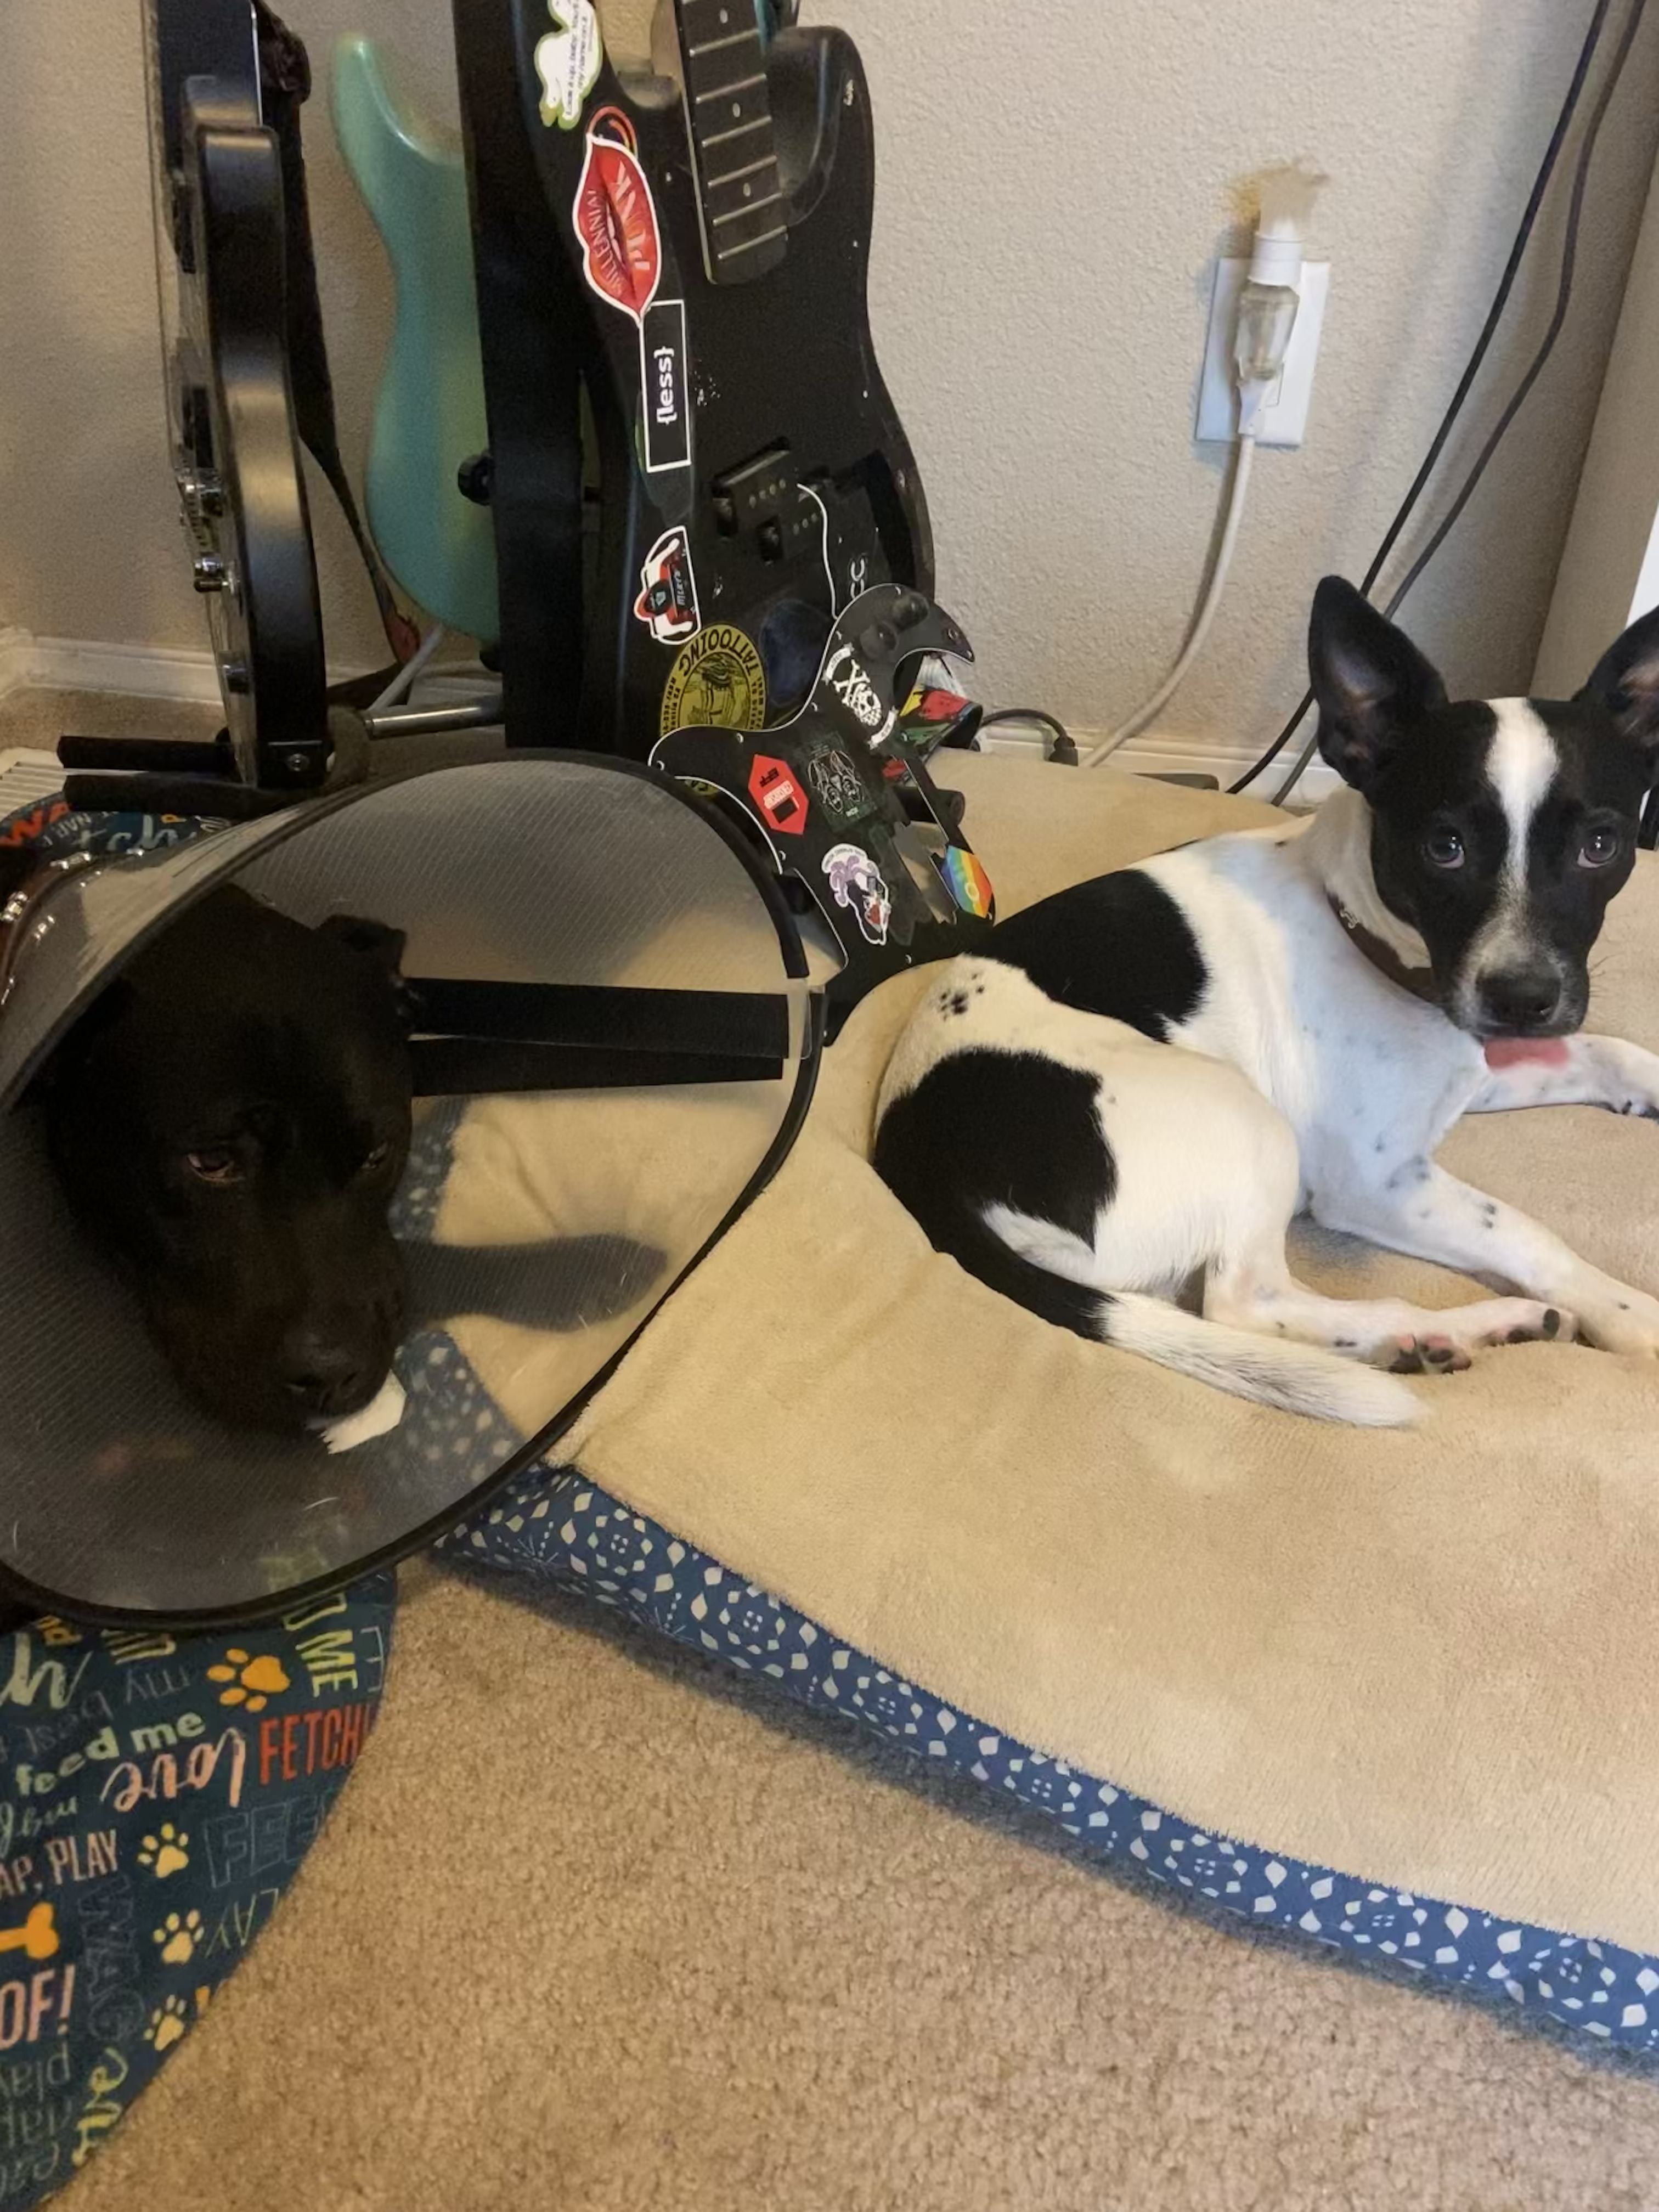 Two dogs looking at the camera. One is wearing a cone, the other has his tongue out